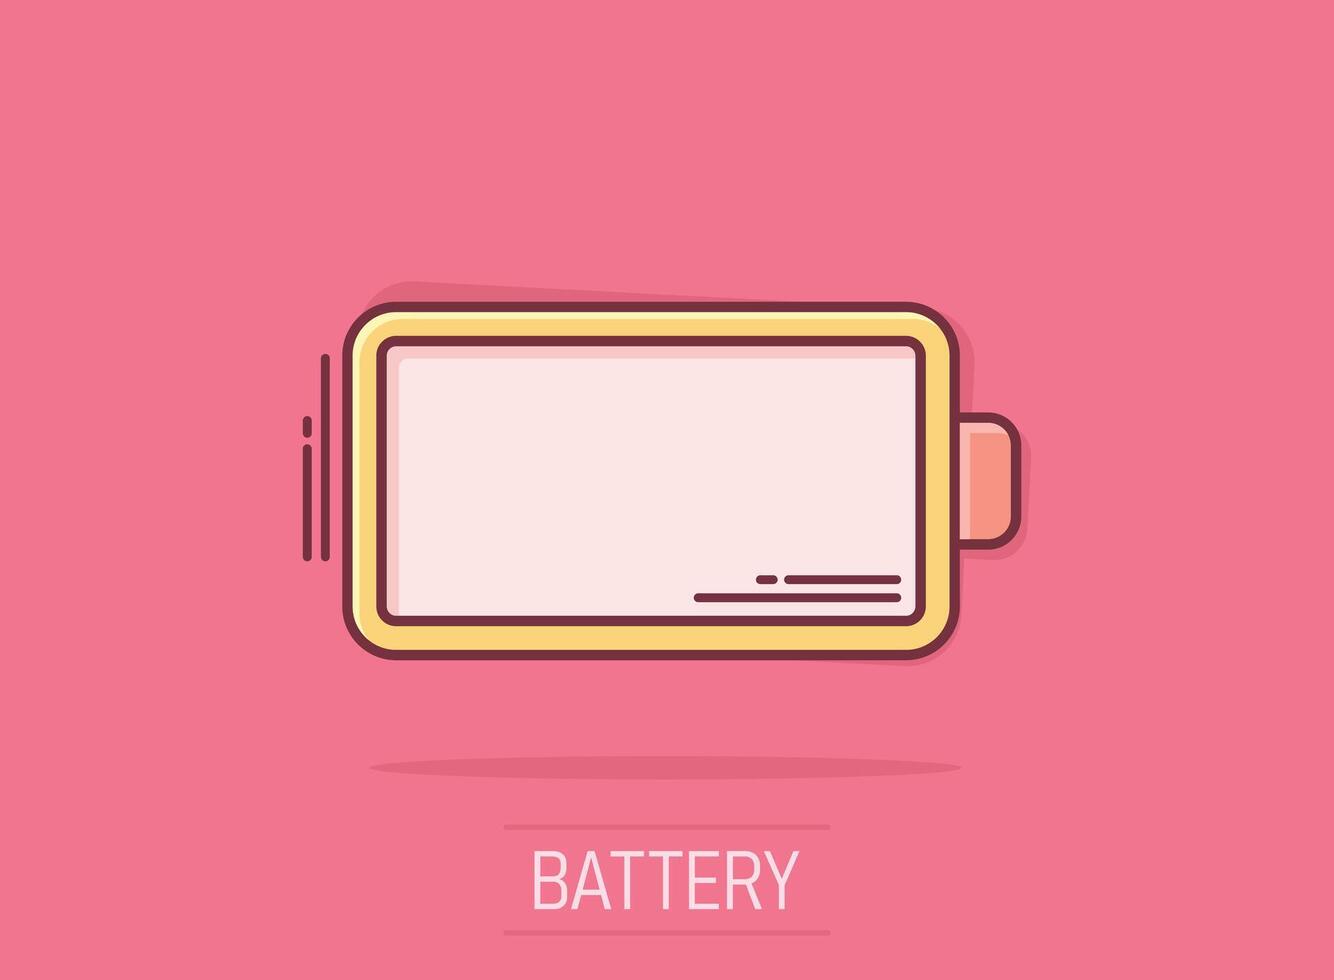 Battery charge icon in comic style. Power level cartoon vector illustration on isolated background. Lithium accumulator splash effect business concept.